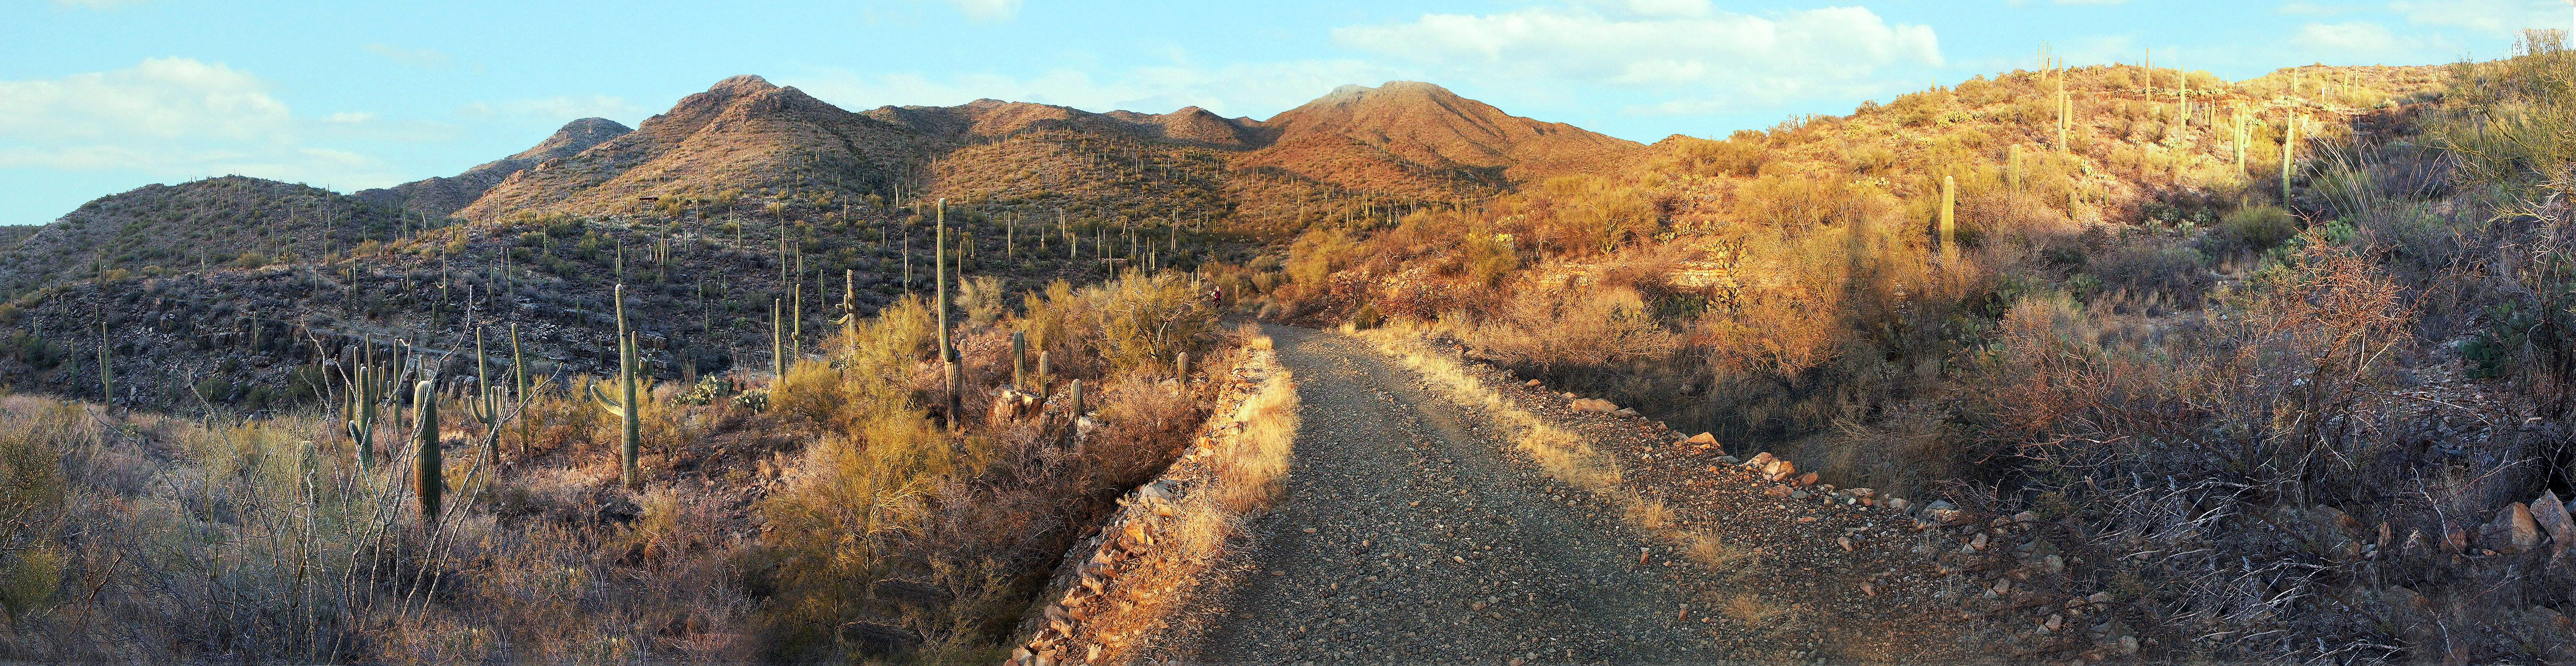 guide to saguaro national park